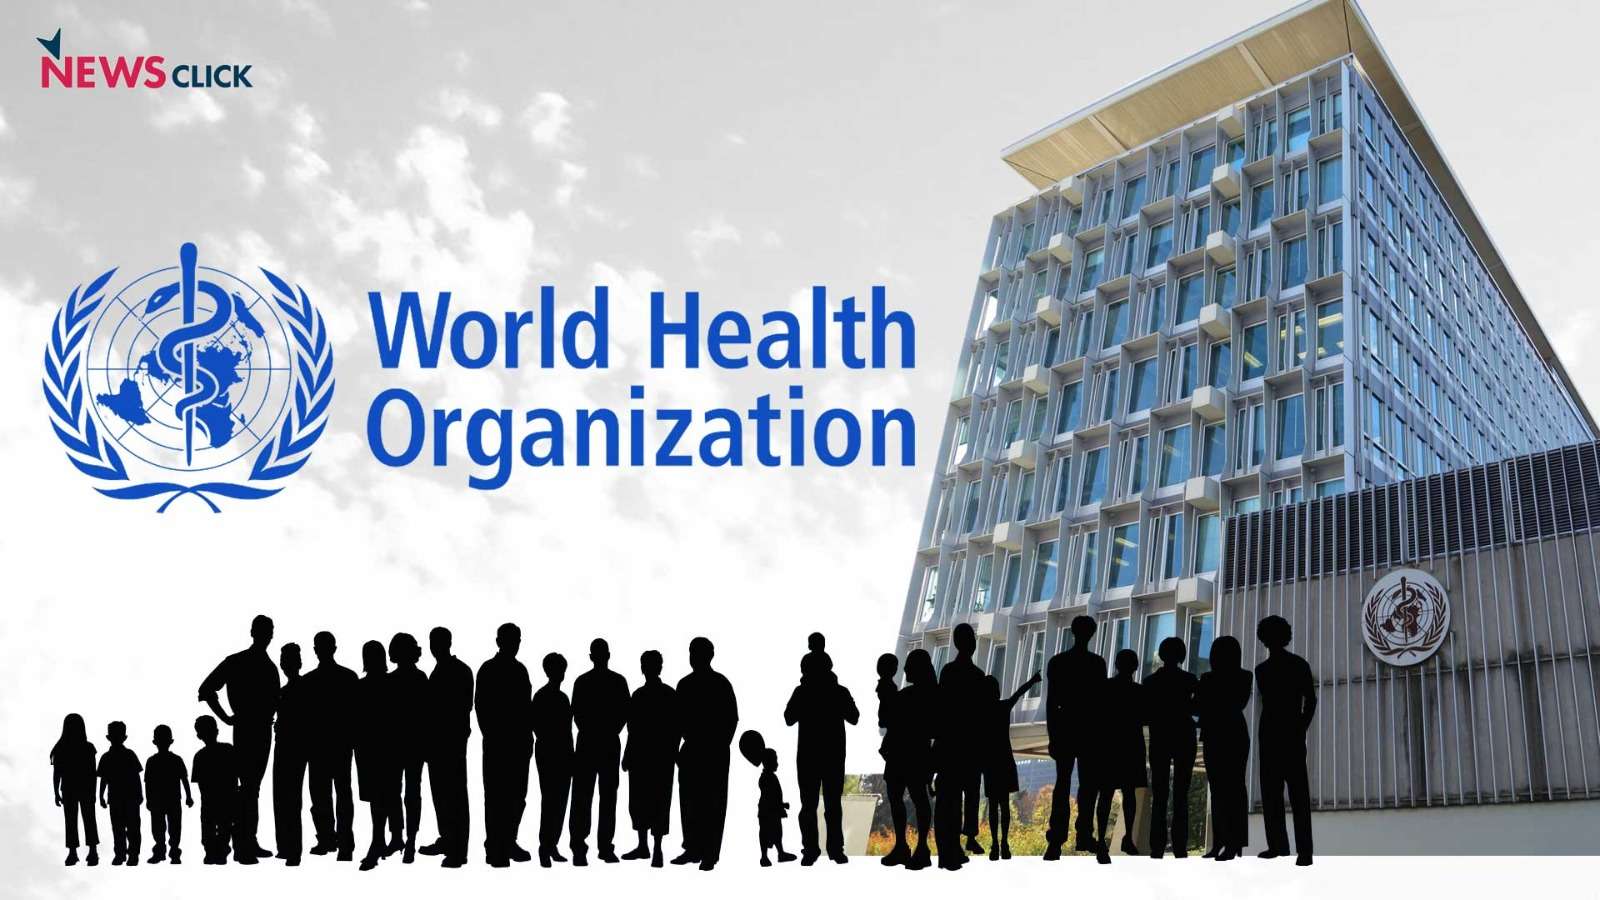 World Health Organization (WHO) - Definition, Role, and History